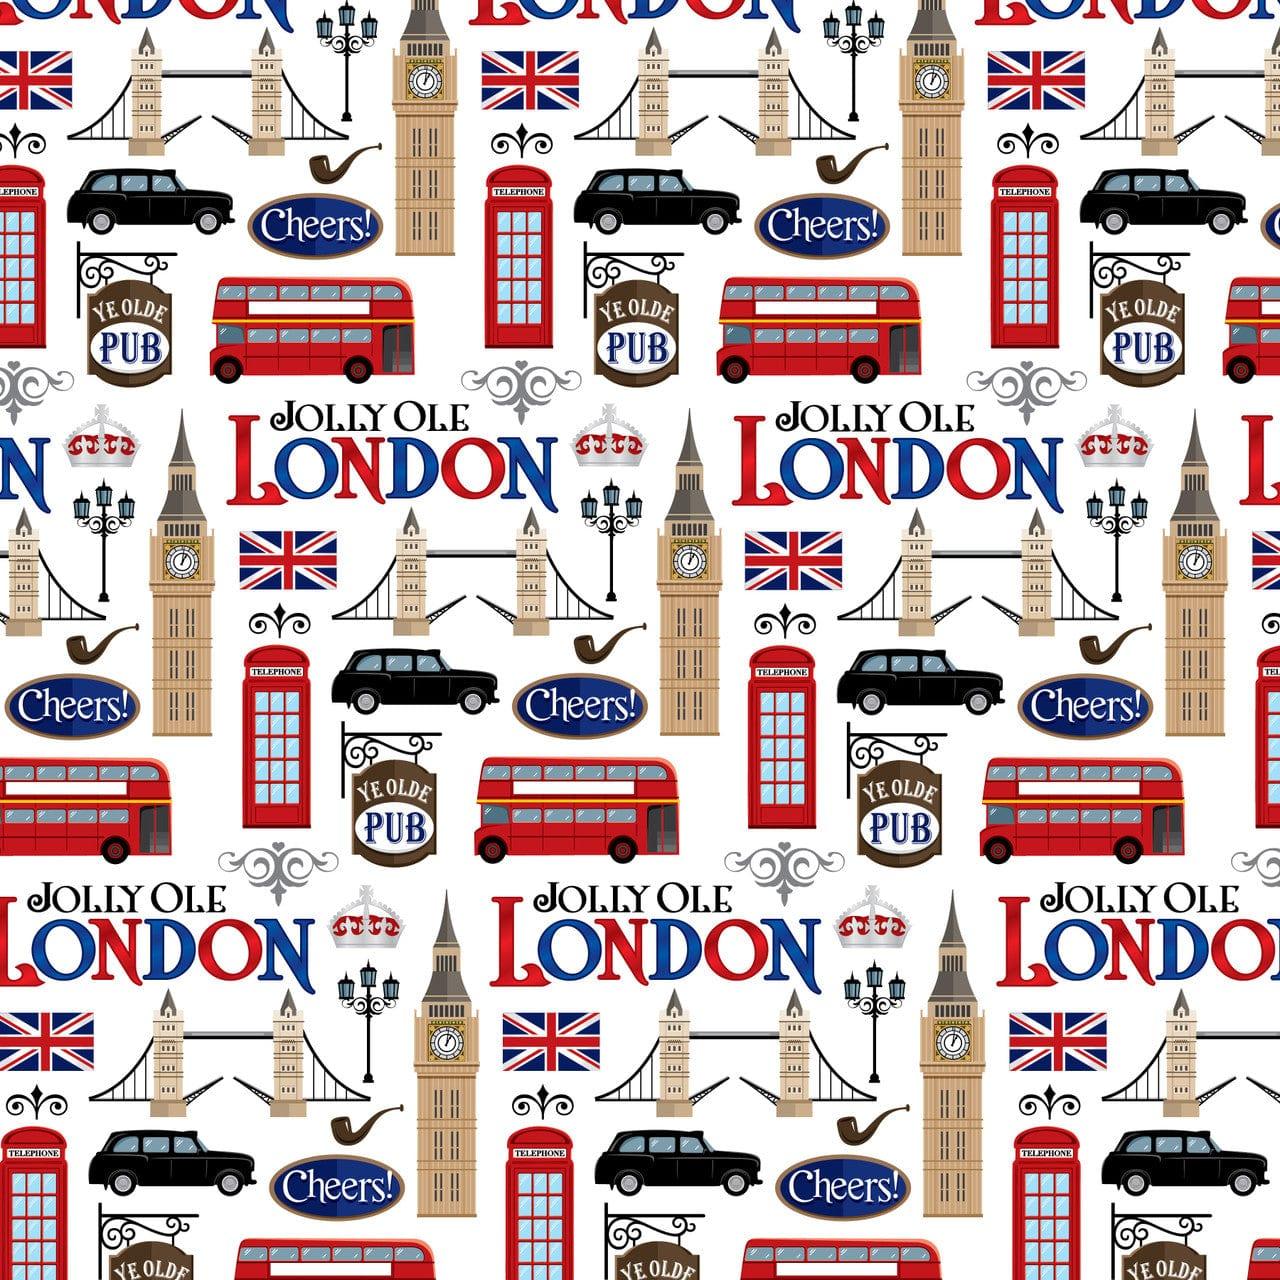 MNineDesign's Jolly Ole London Collection London Icons 12 x 12 Double-Sided Scrapbook Paper by SSC Designs - Scrapbook Supply Companies